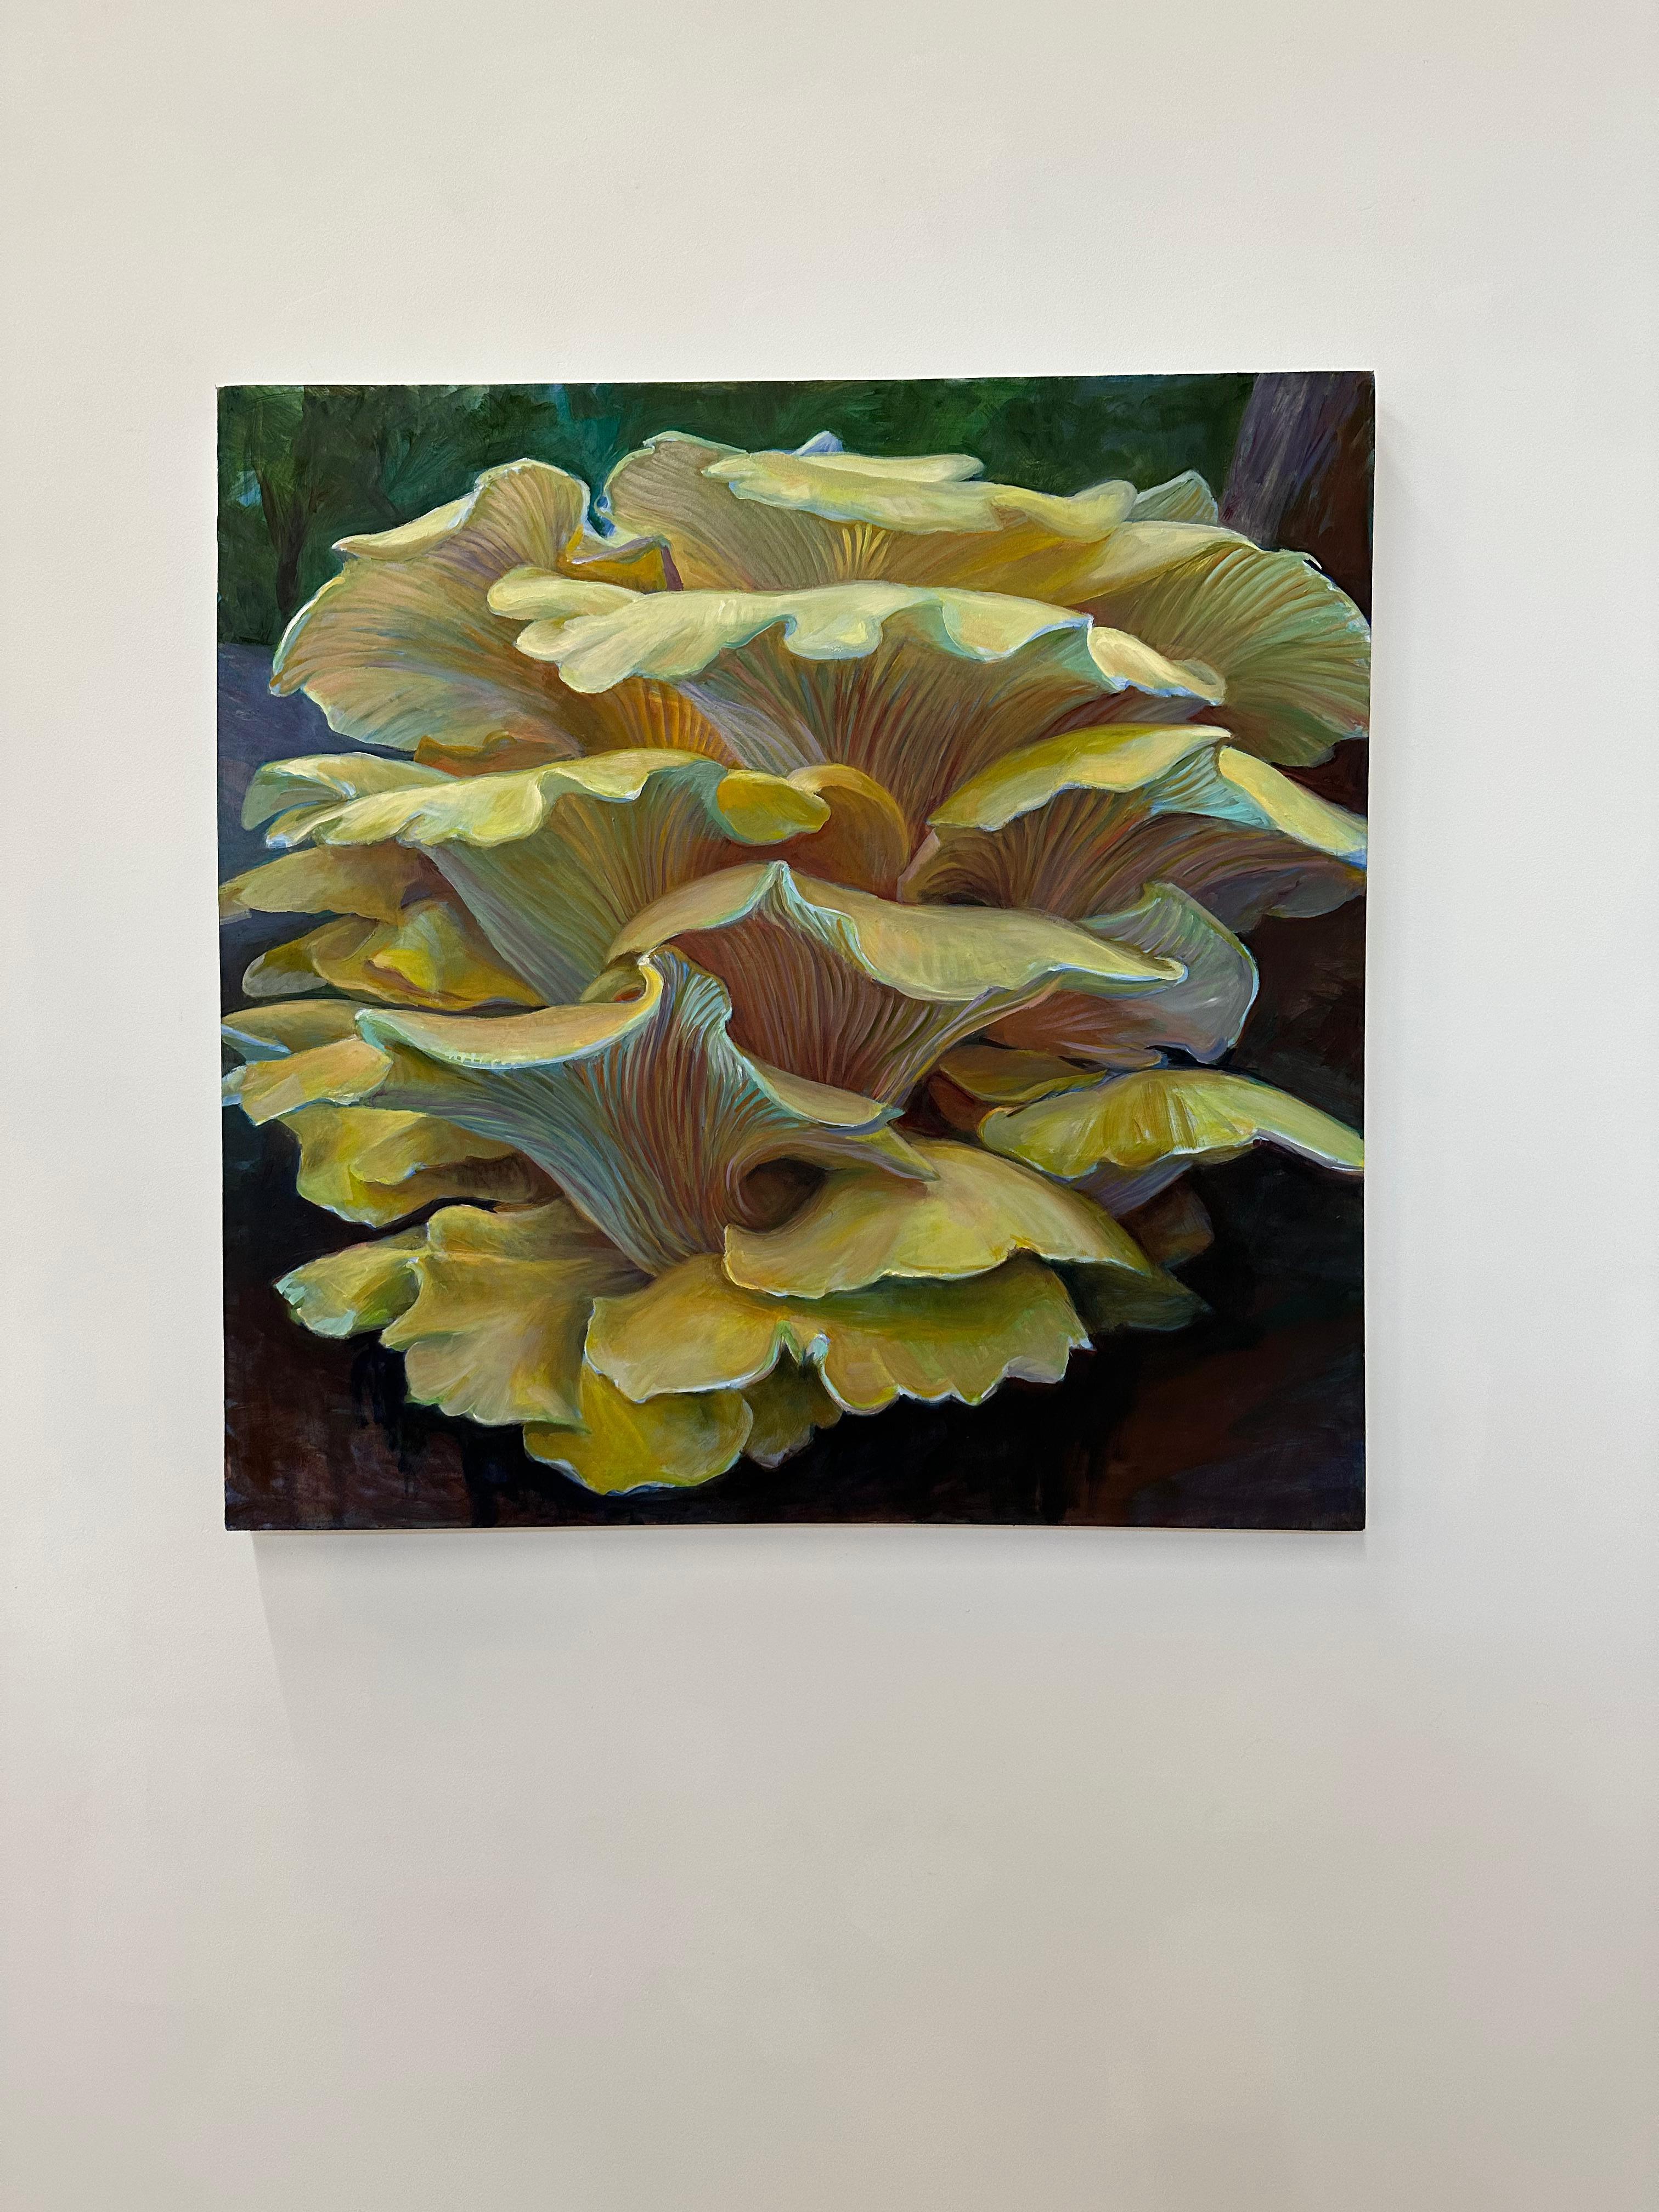 Golden Oysters Two, Mushroom Fungi Still Life, Yellow, Ochre, Dark Violet, Blue - Painting by Andrea Kantrowitz